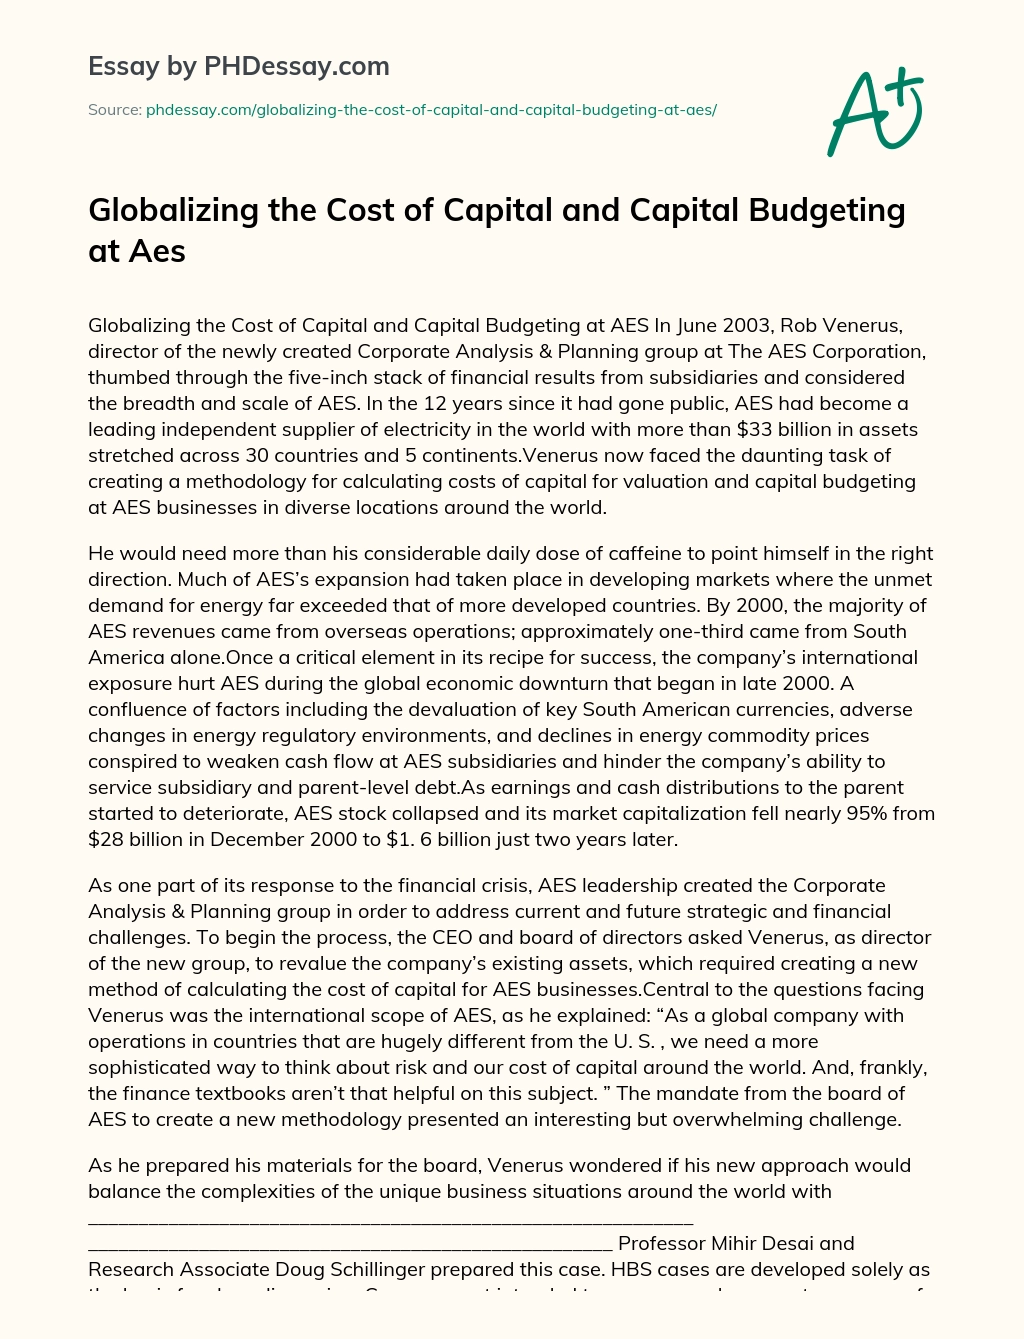 Globalizing the Cost of Capital and Capital Budgeting at Aes essay